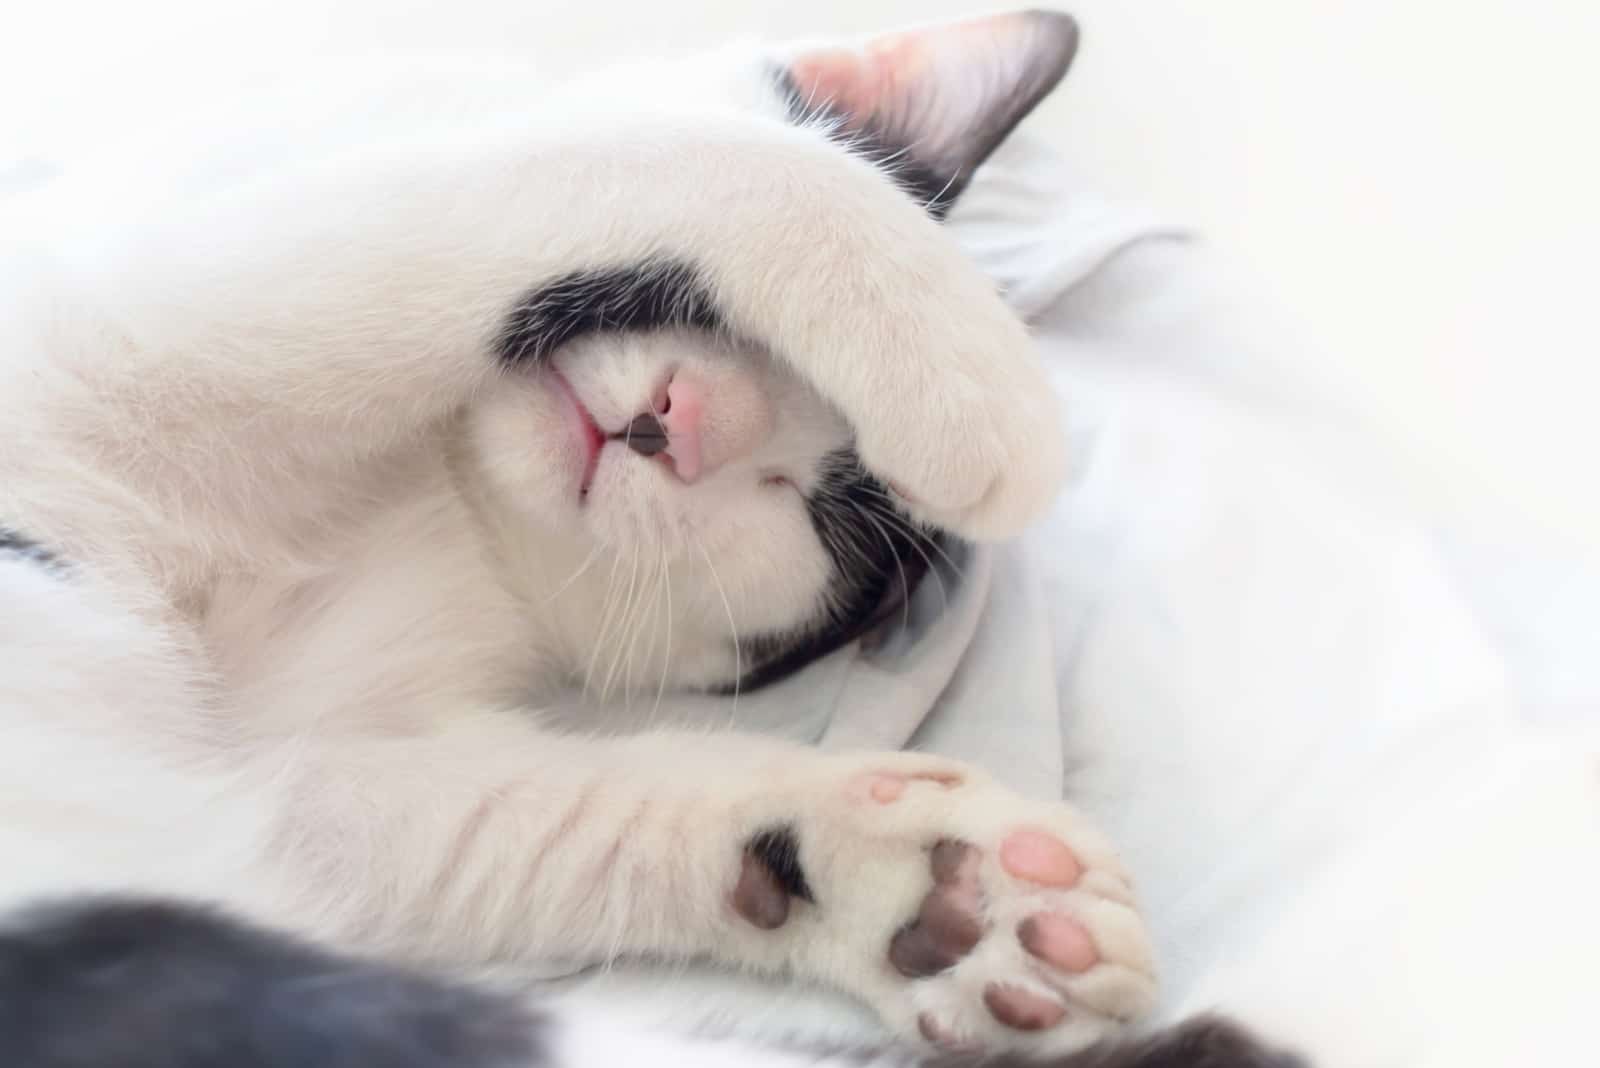 cat sleeping with paw cover its face on white blanket